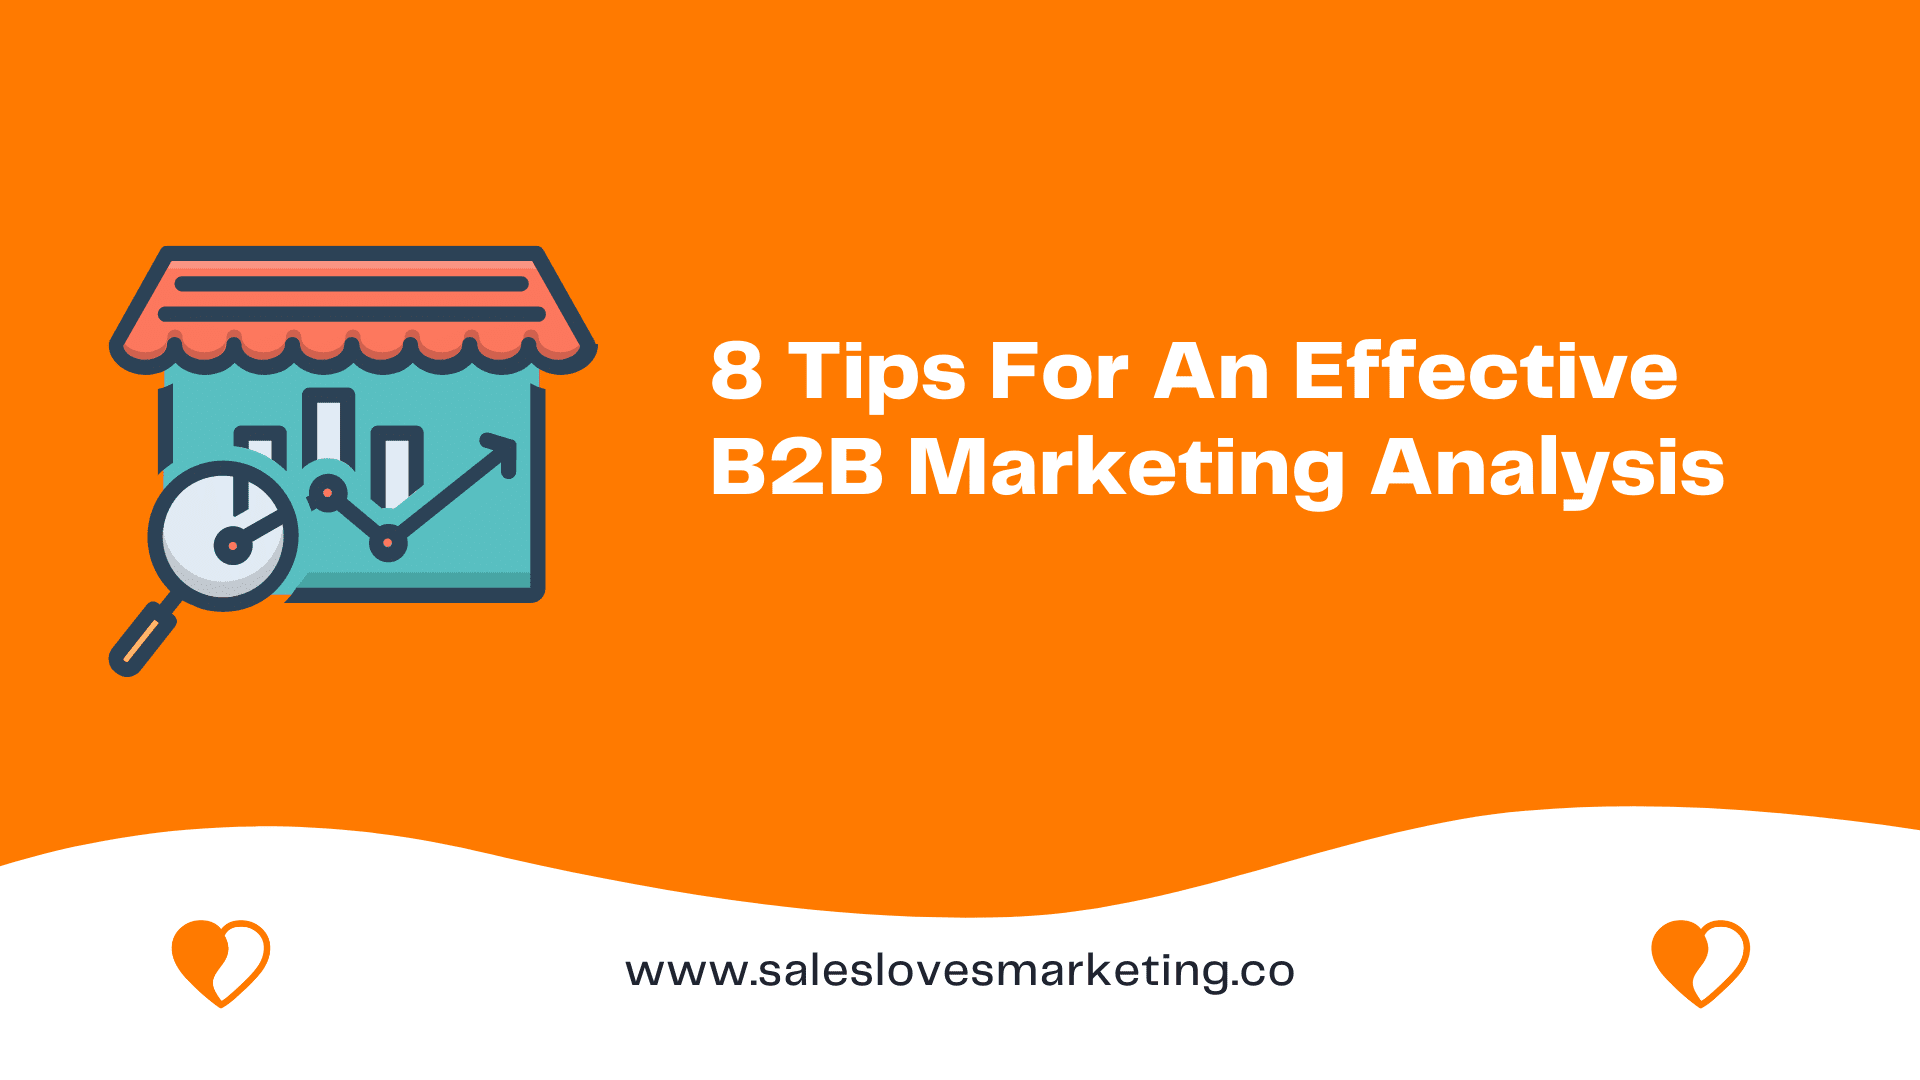 8 Tips For An Effective B2B Marketing Analysis